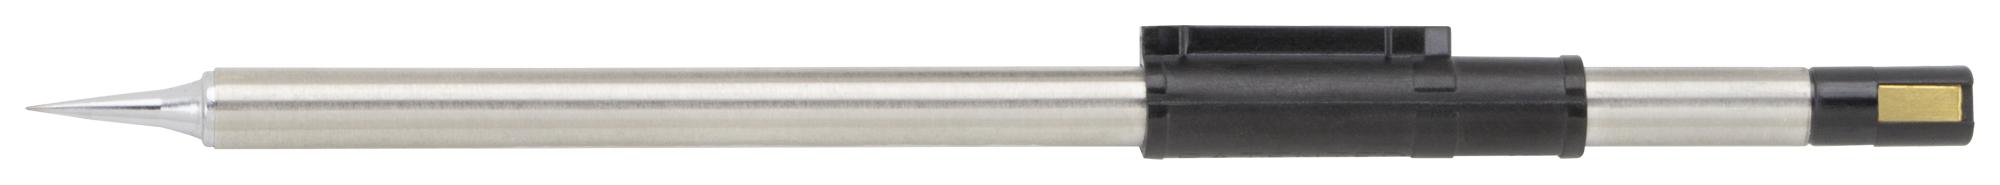 1124-0036-P1 TIP CARTRIDGE, CONICAL, 1/128" PACE